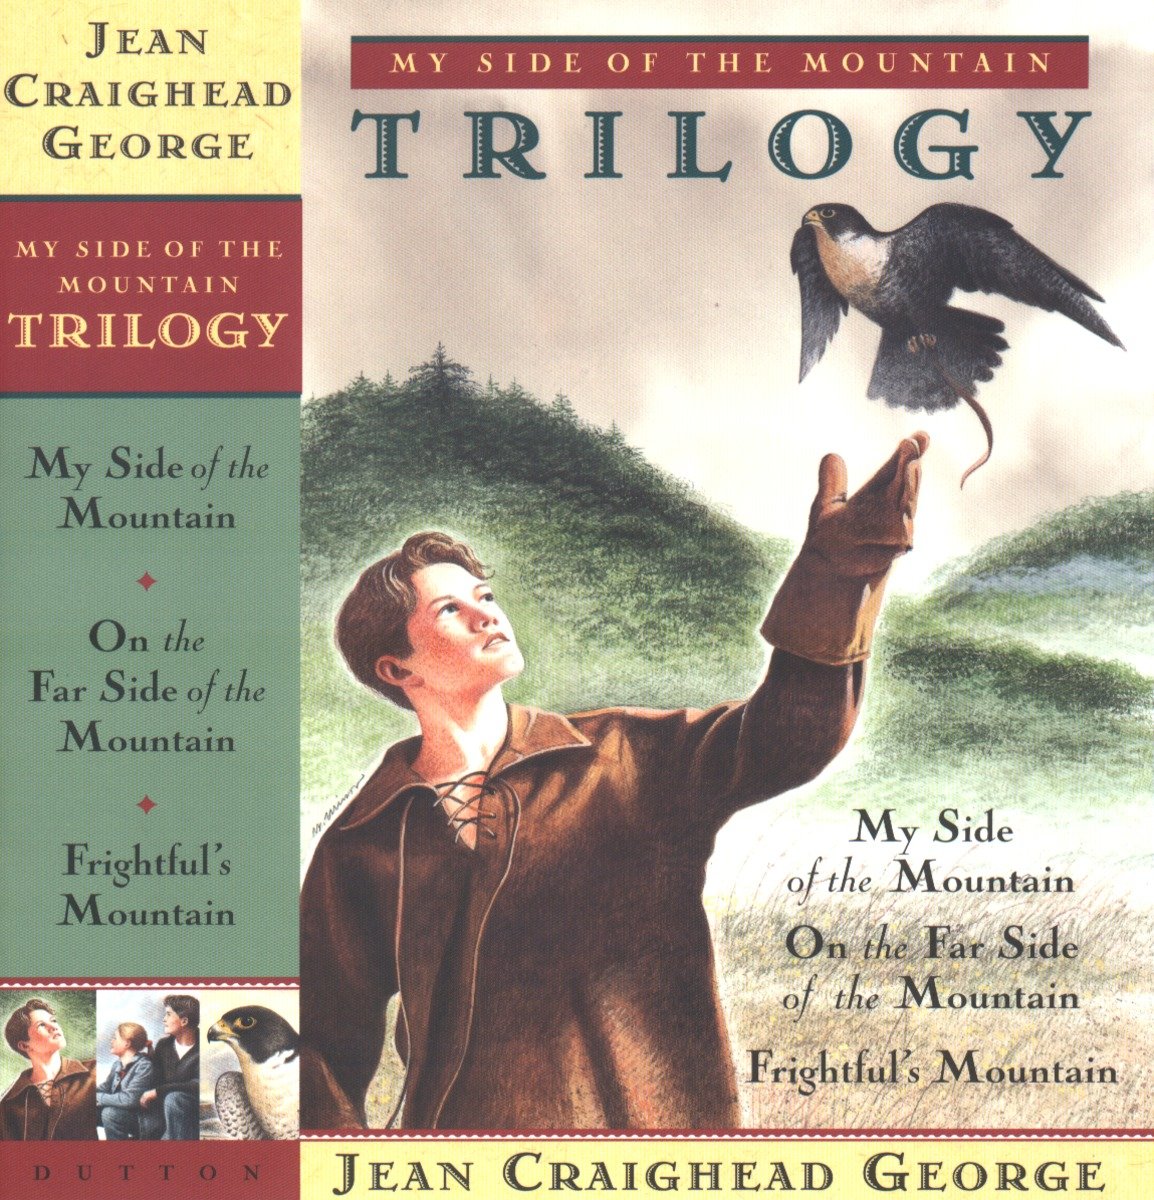 My Side Of The Mountain Trilogy (Hardcover Book)